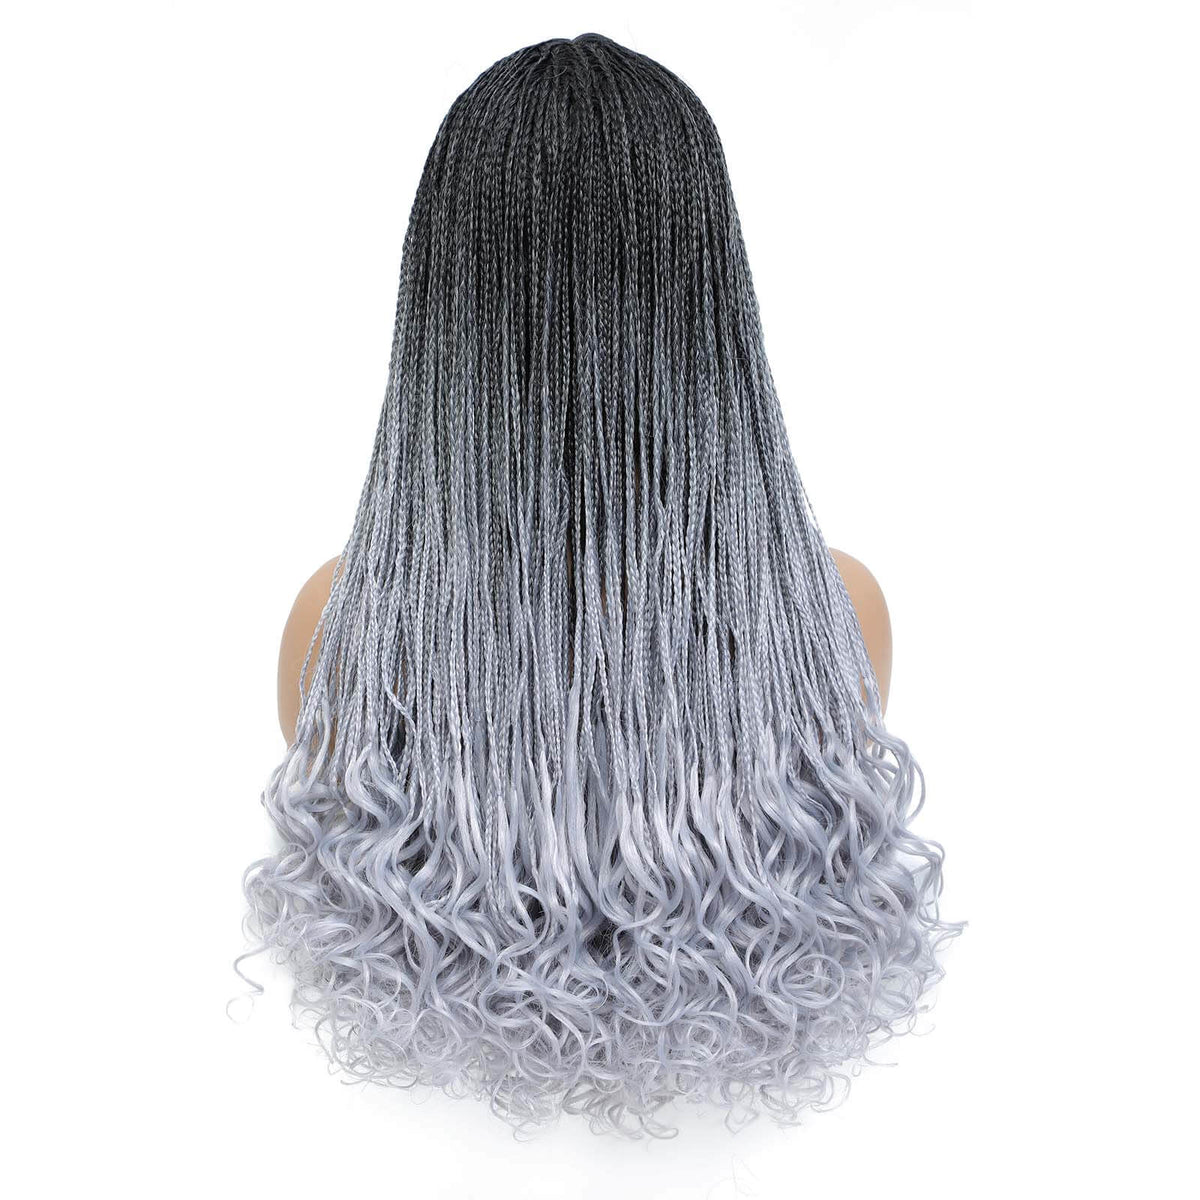 Box Braided Wig with Goddess Curly Ends Ombre Grey Silver Gray Color Right Back Show